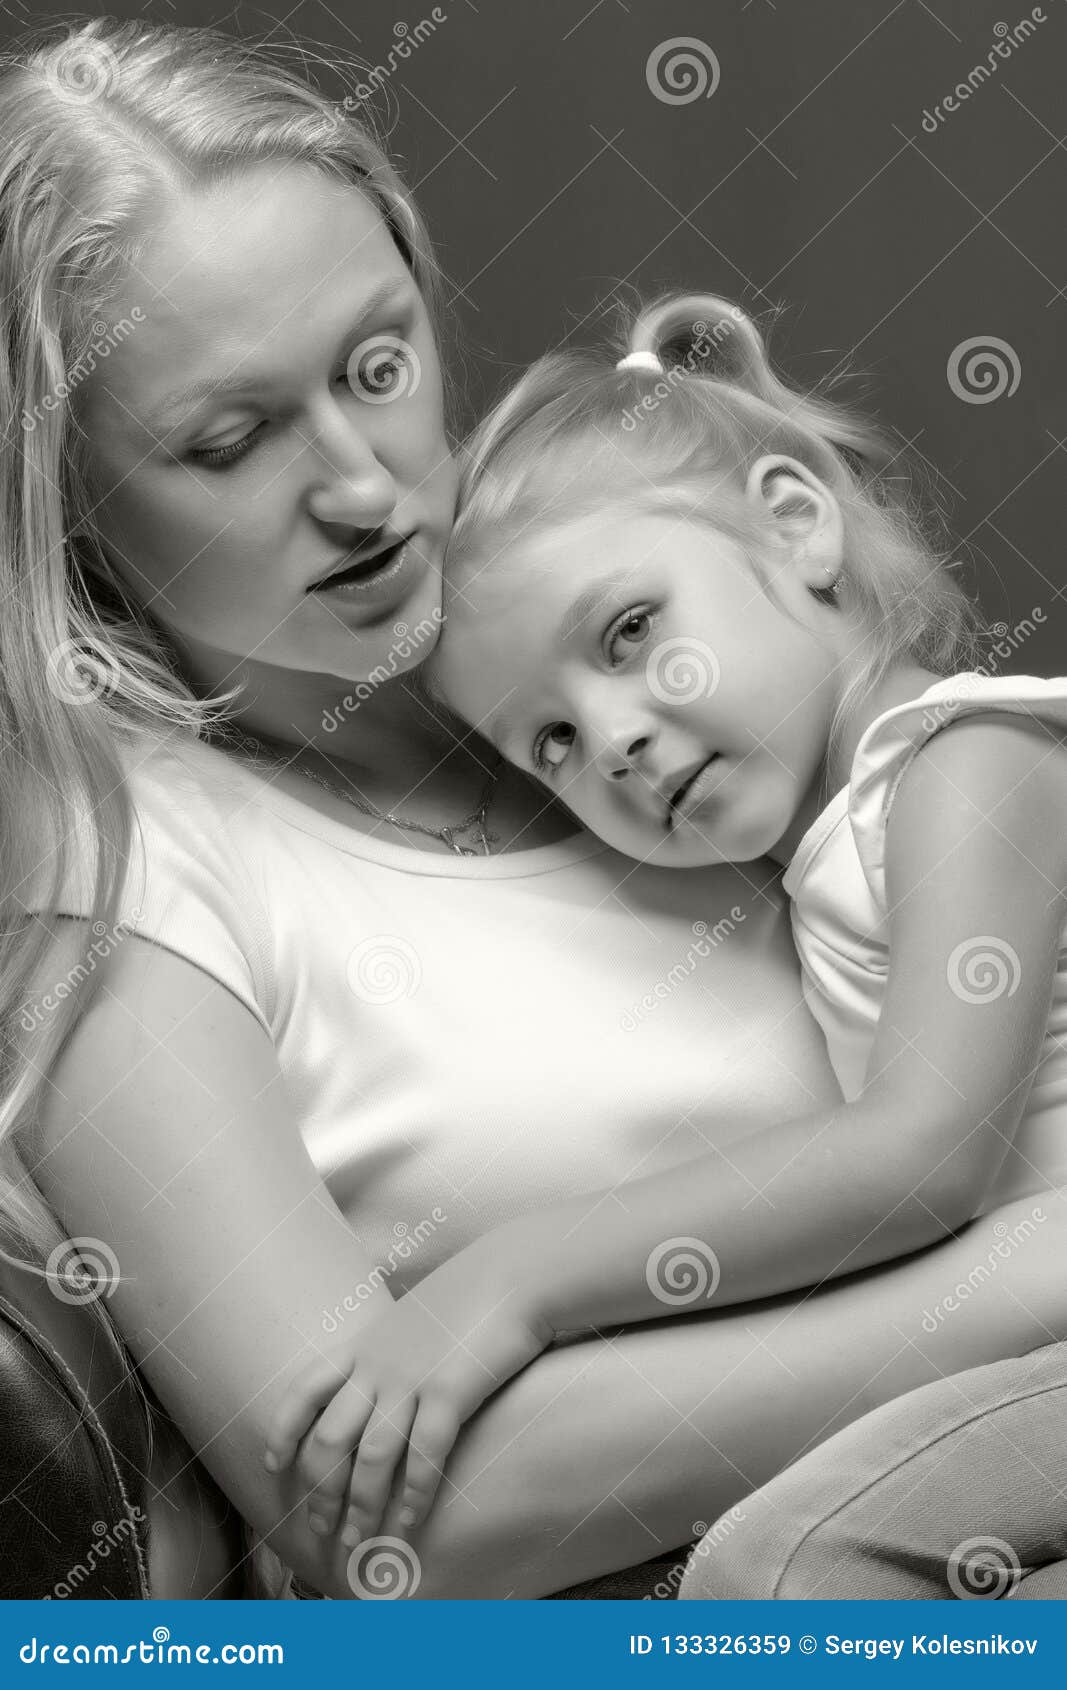 Mother And Little Daughter Gently Embrace Stock Image Image Of Embrace Embracing 133326359 